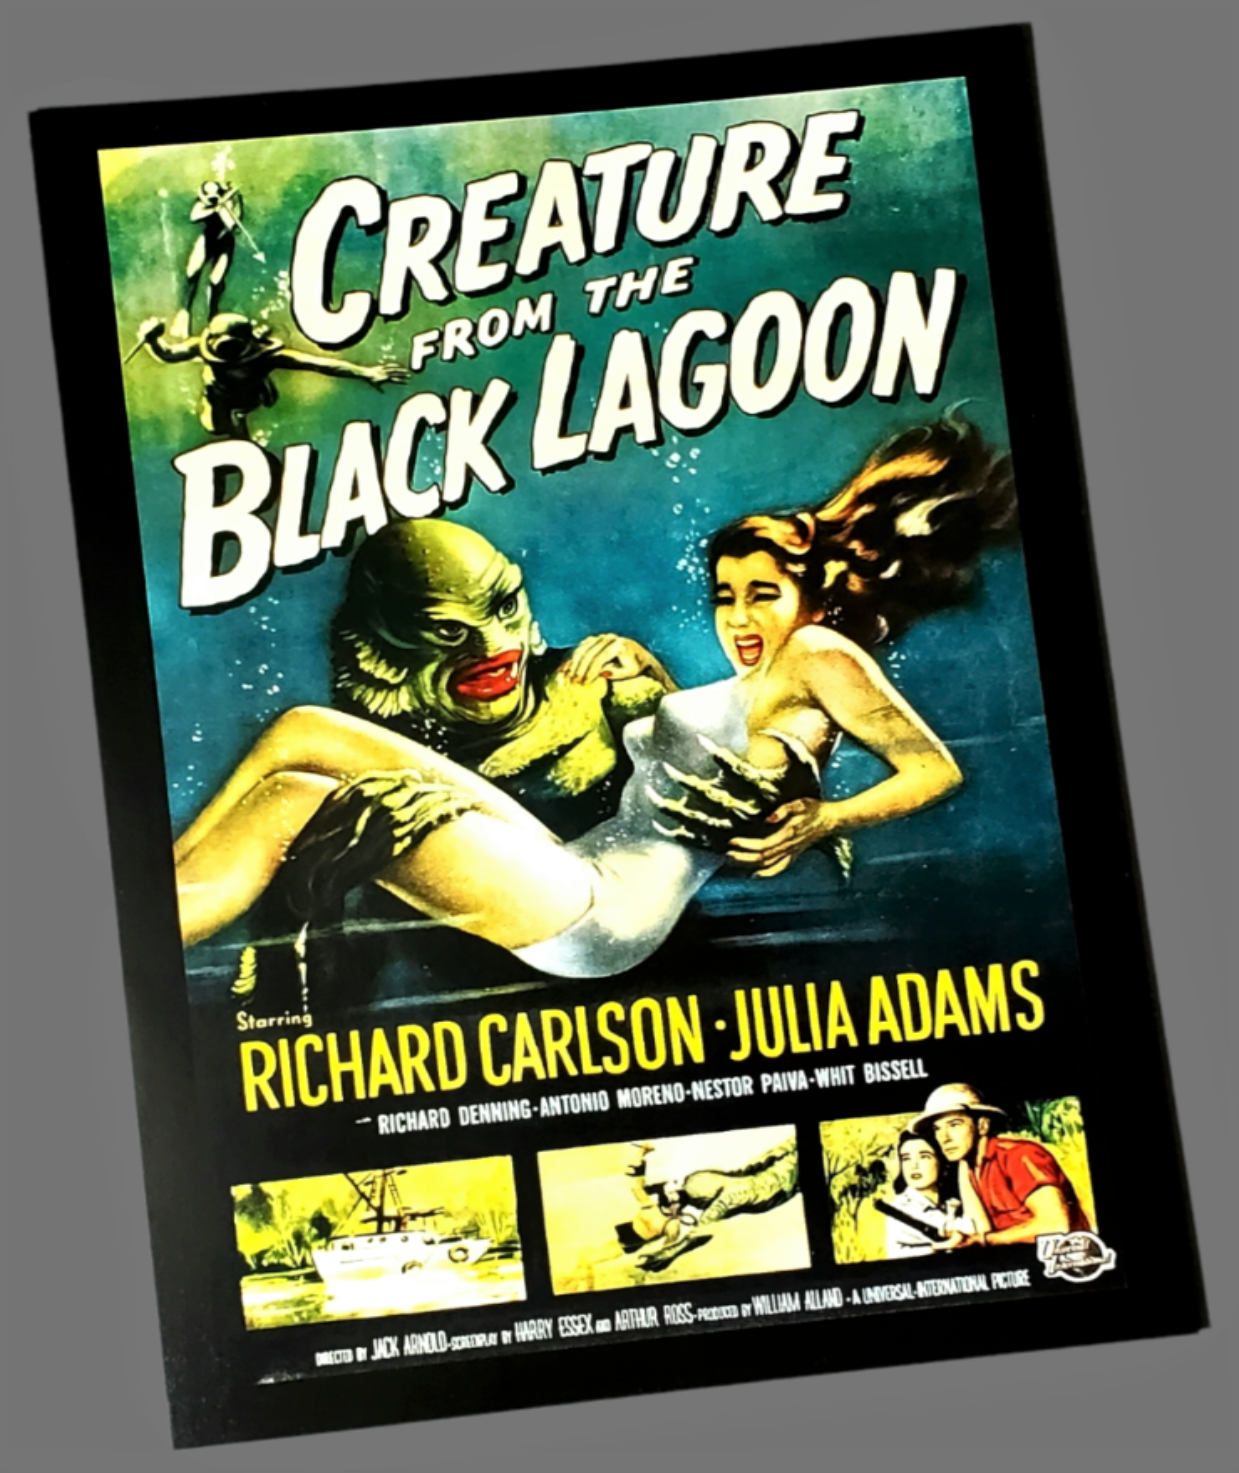 Creature From The Black Lagoon Poster For Sale In AREA51GALLERY New Orleans